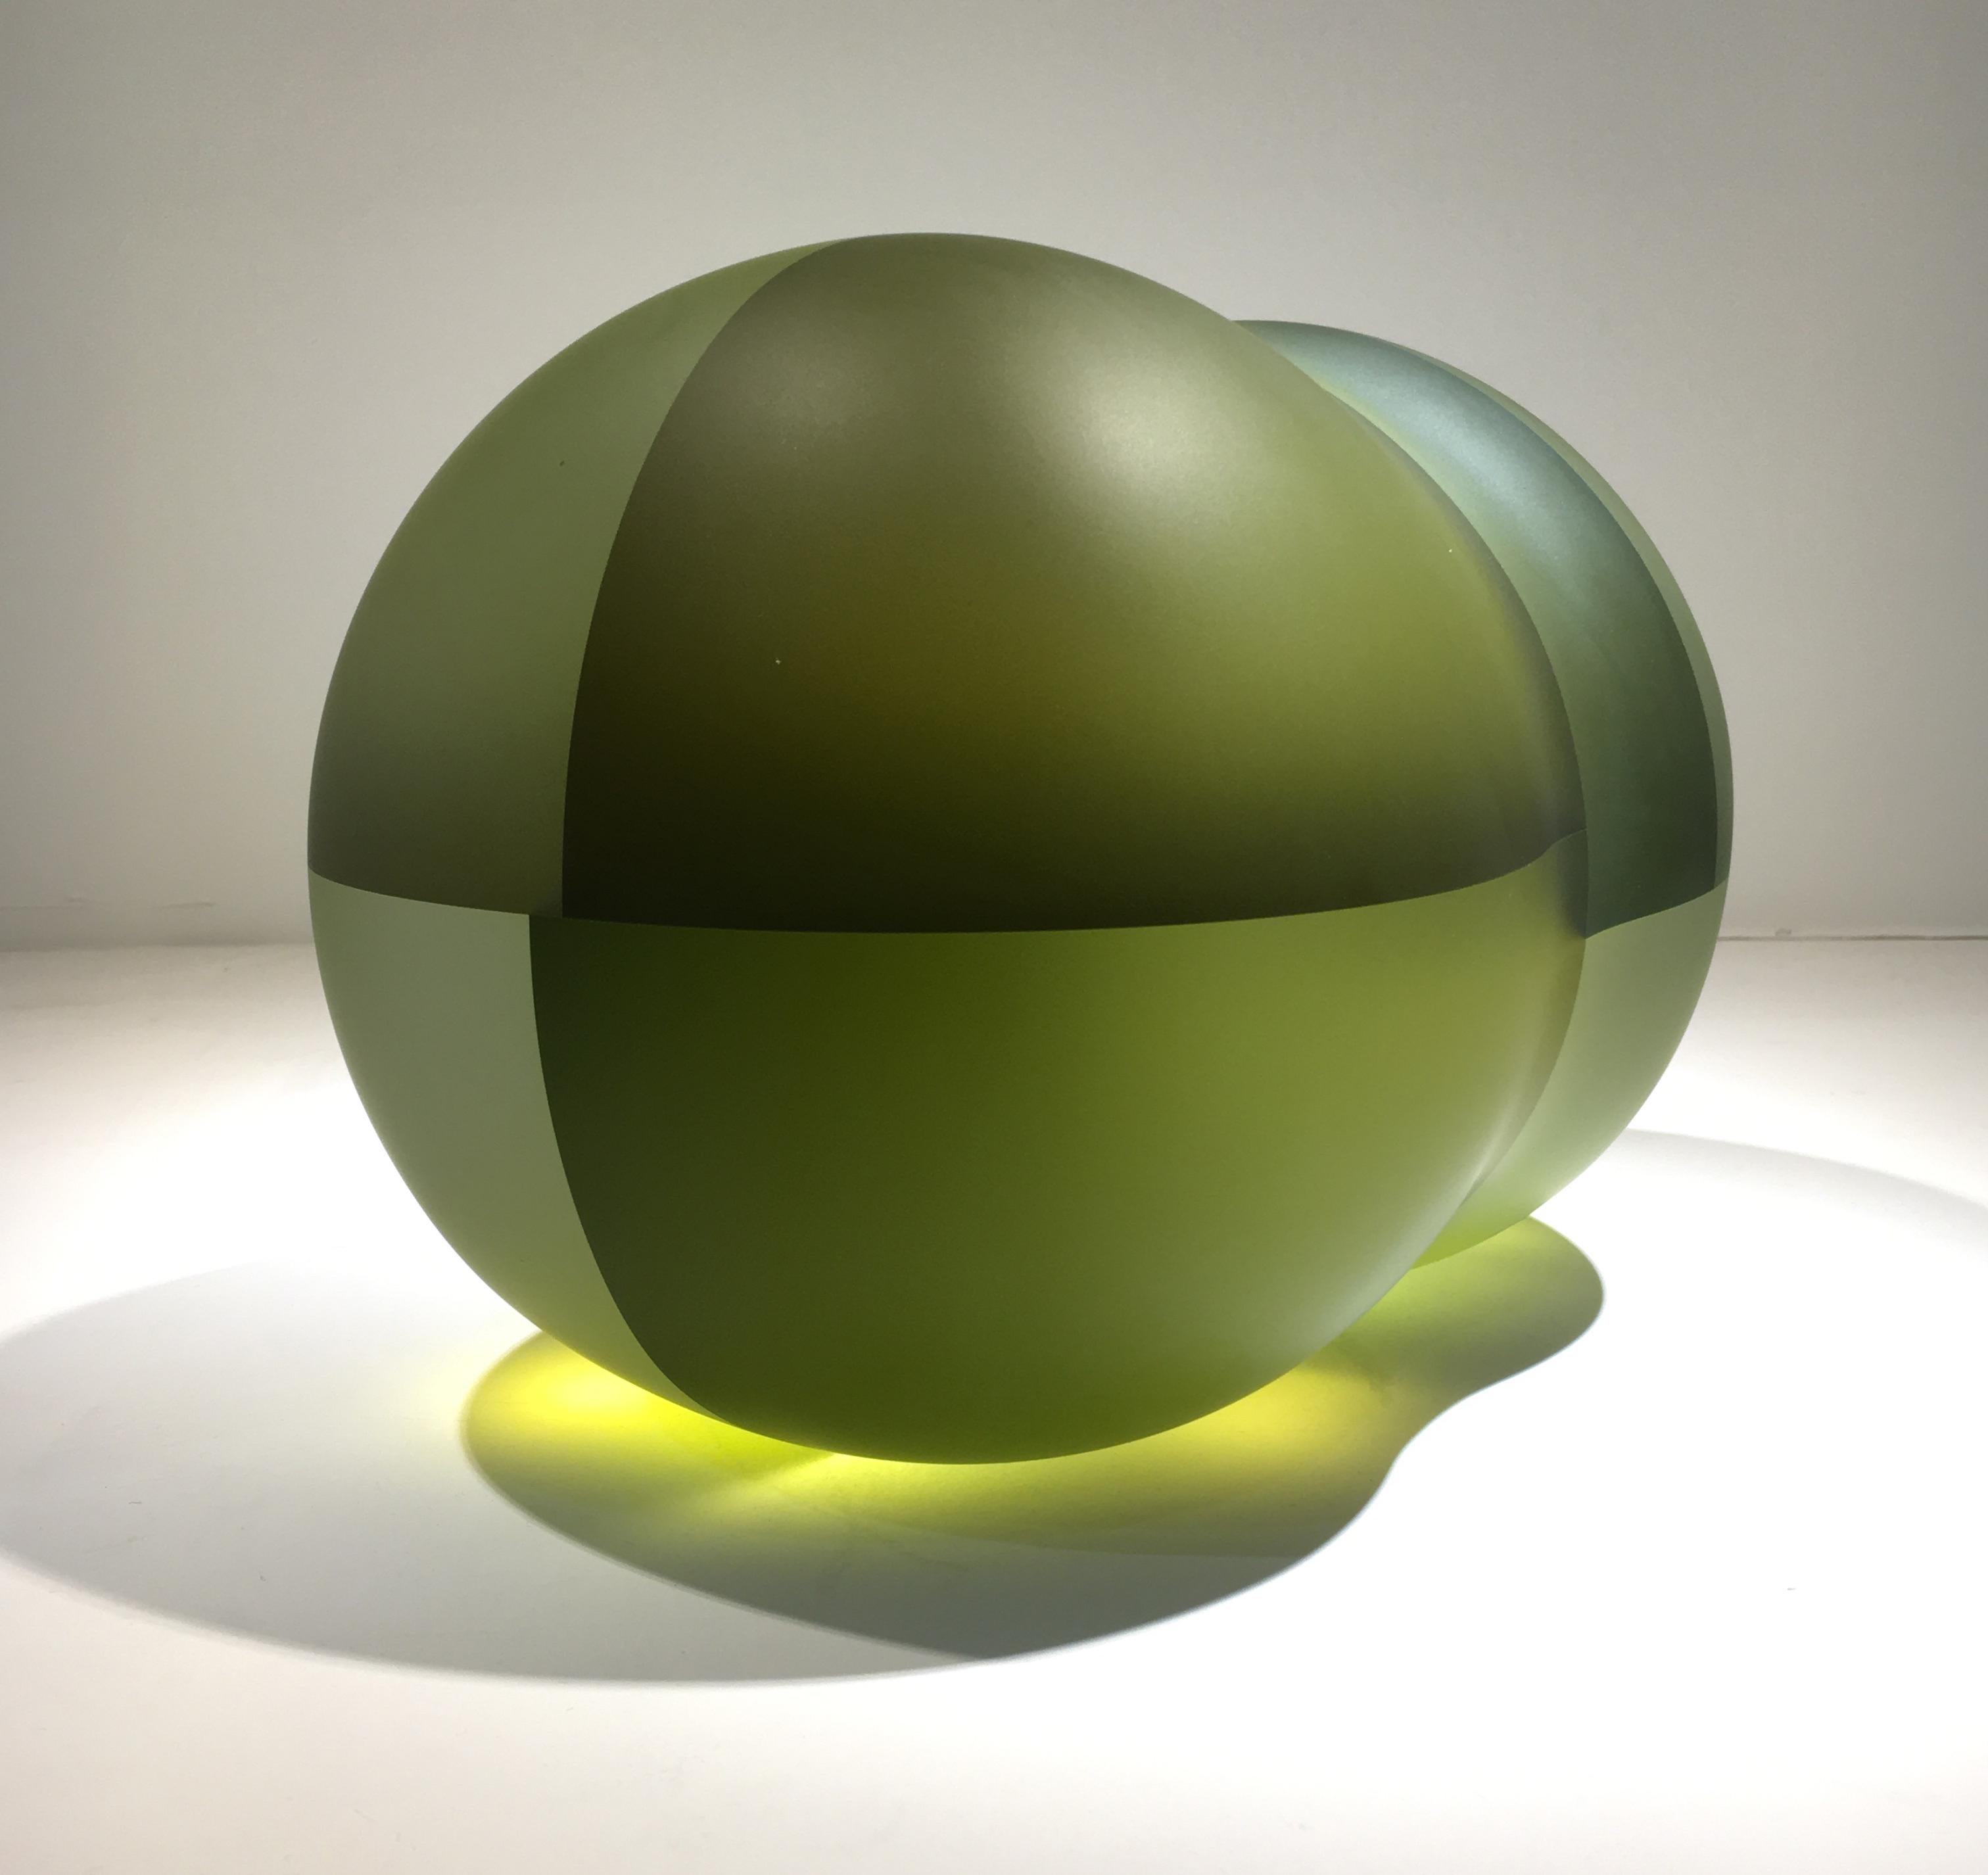 Green Cosmarium Segmentation, Cut and Carved Color Laminated Optical Glass - Contemporary Sculpture by Jiyong Lee